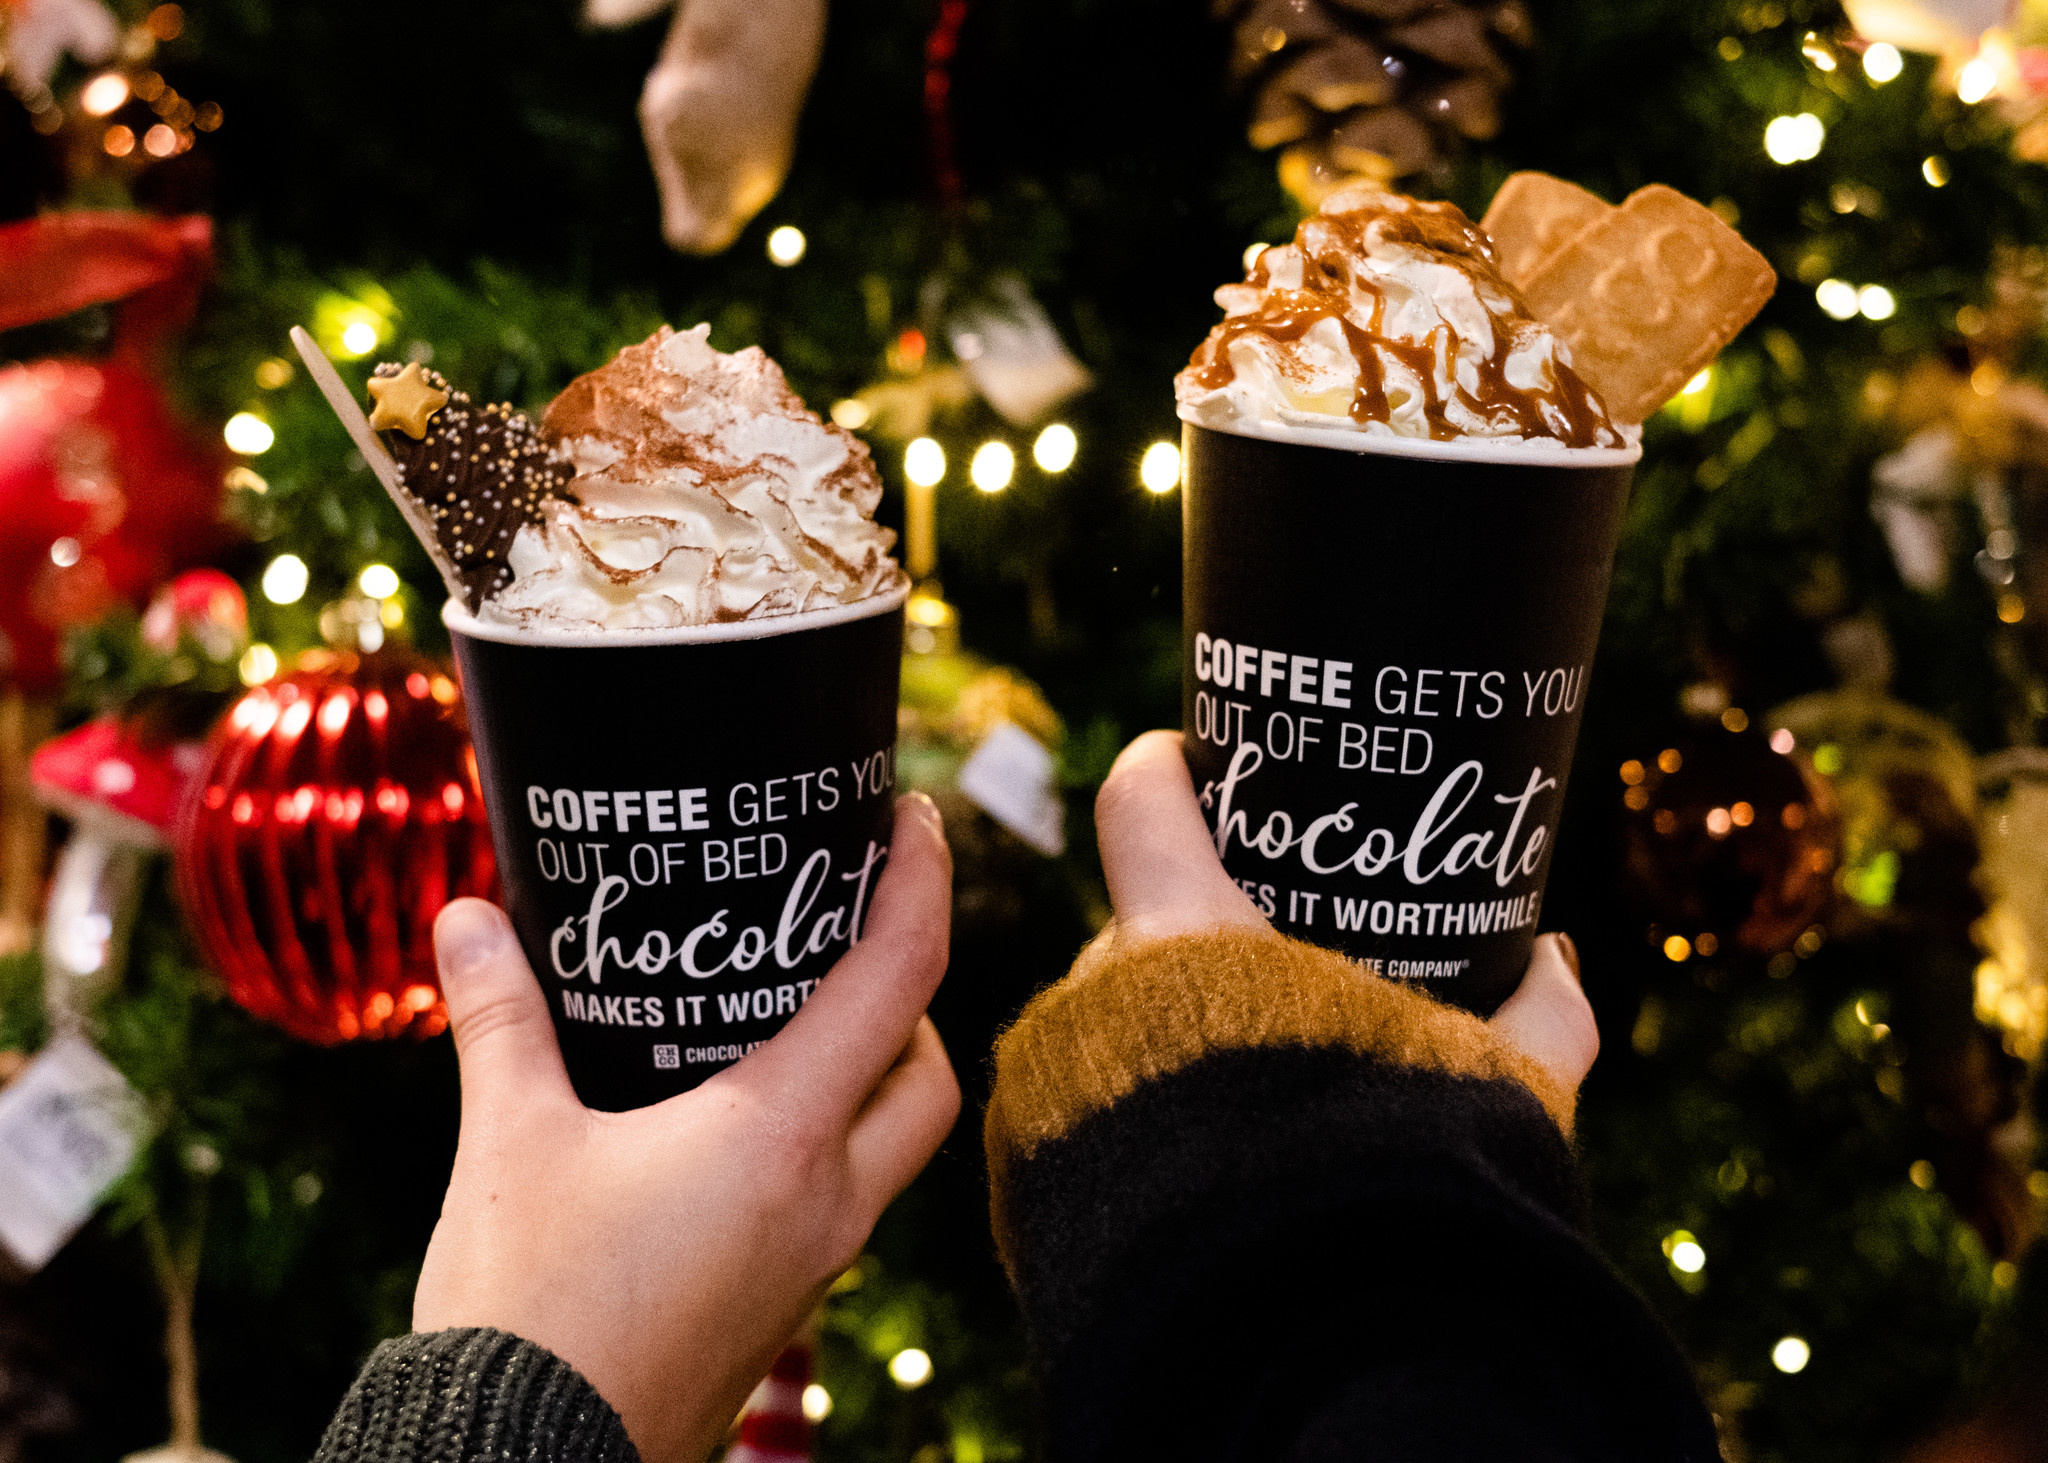 All I want for Christmas... is chocolate!